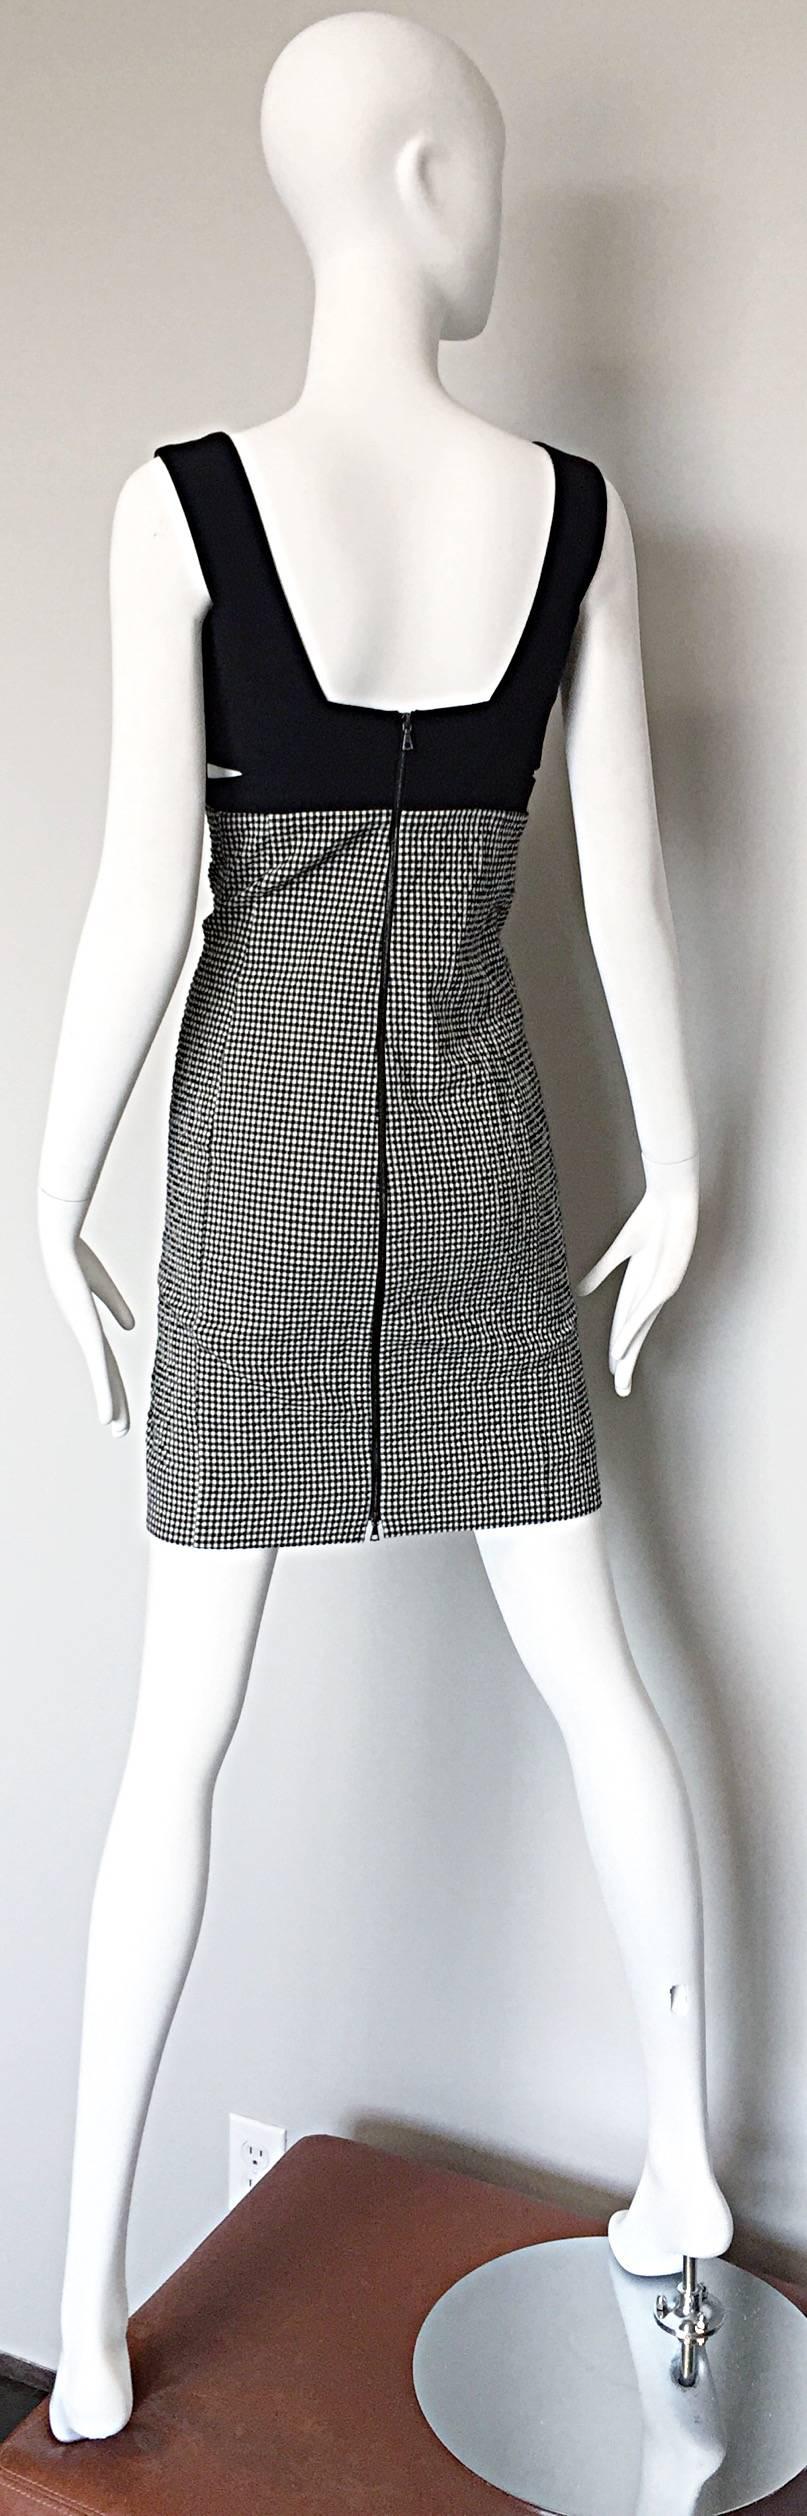 Narcisco Rodriguez Black and White Gingham Cut - Out Runway Dress Size 42 / 6 For Sale 2